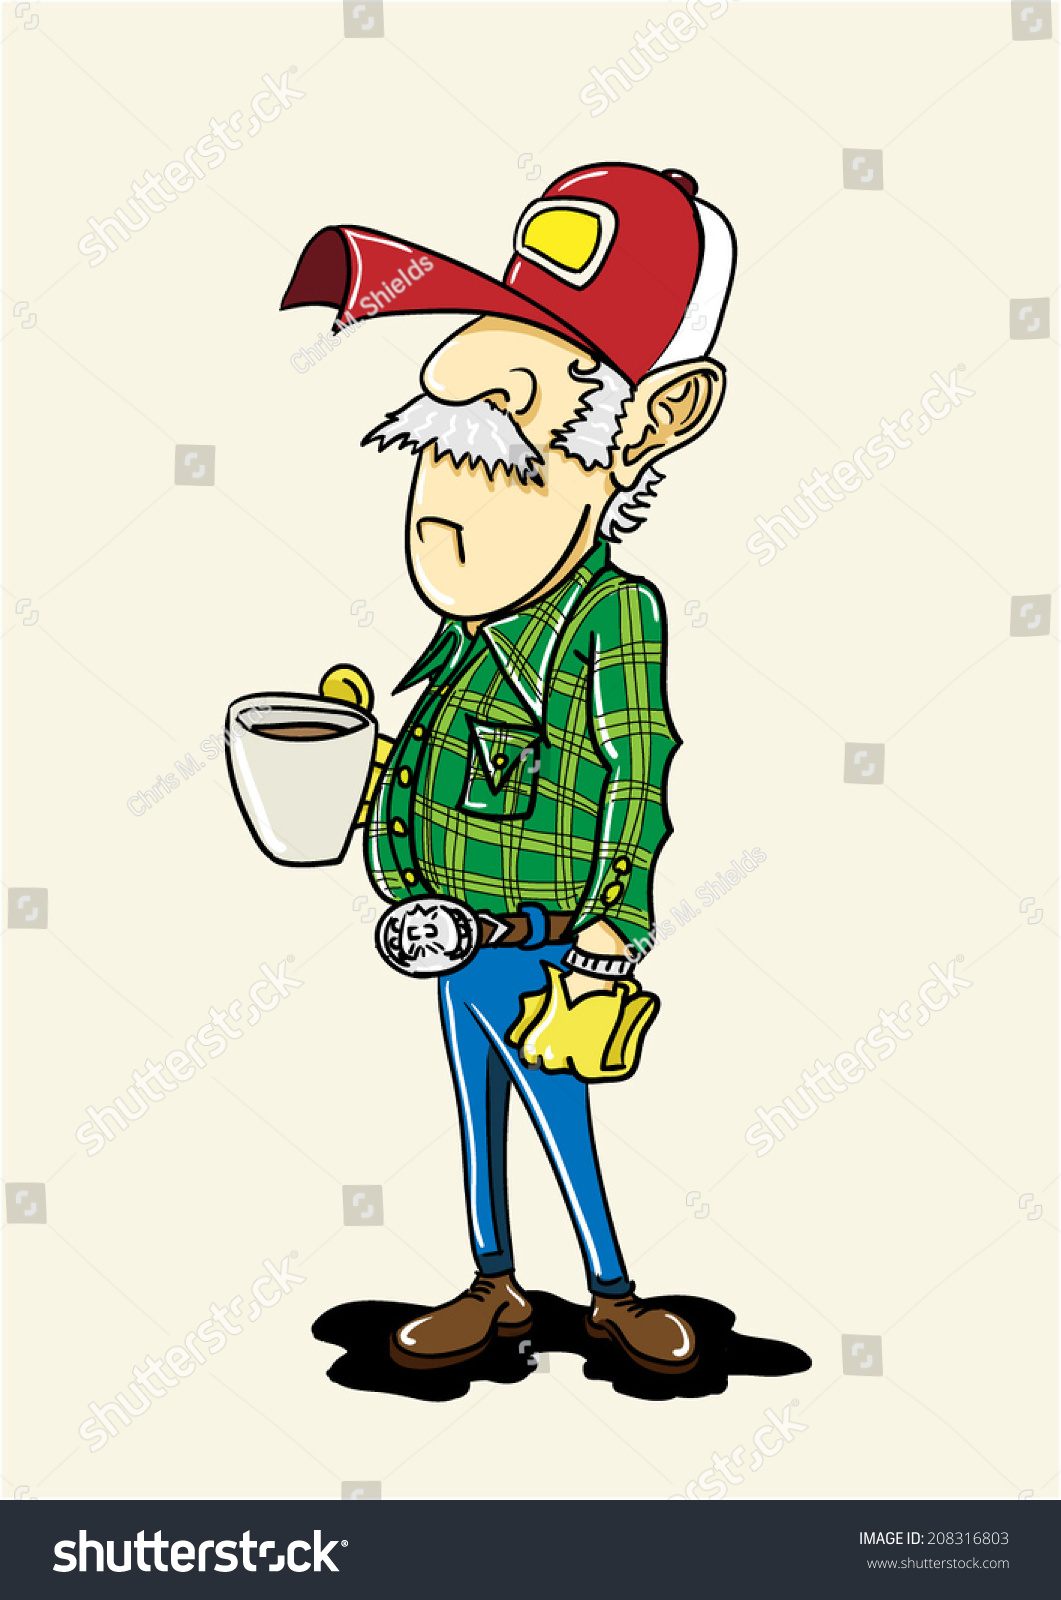 Old Truck Driver Drinking His Coffee. Stock Vector ...